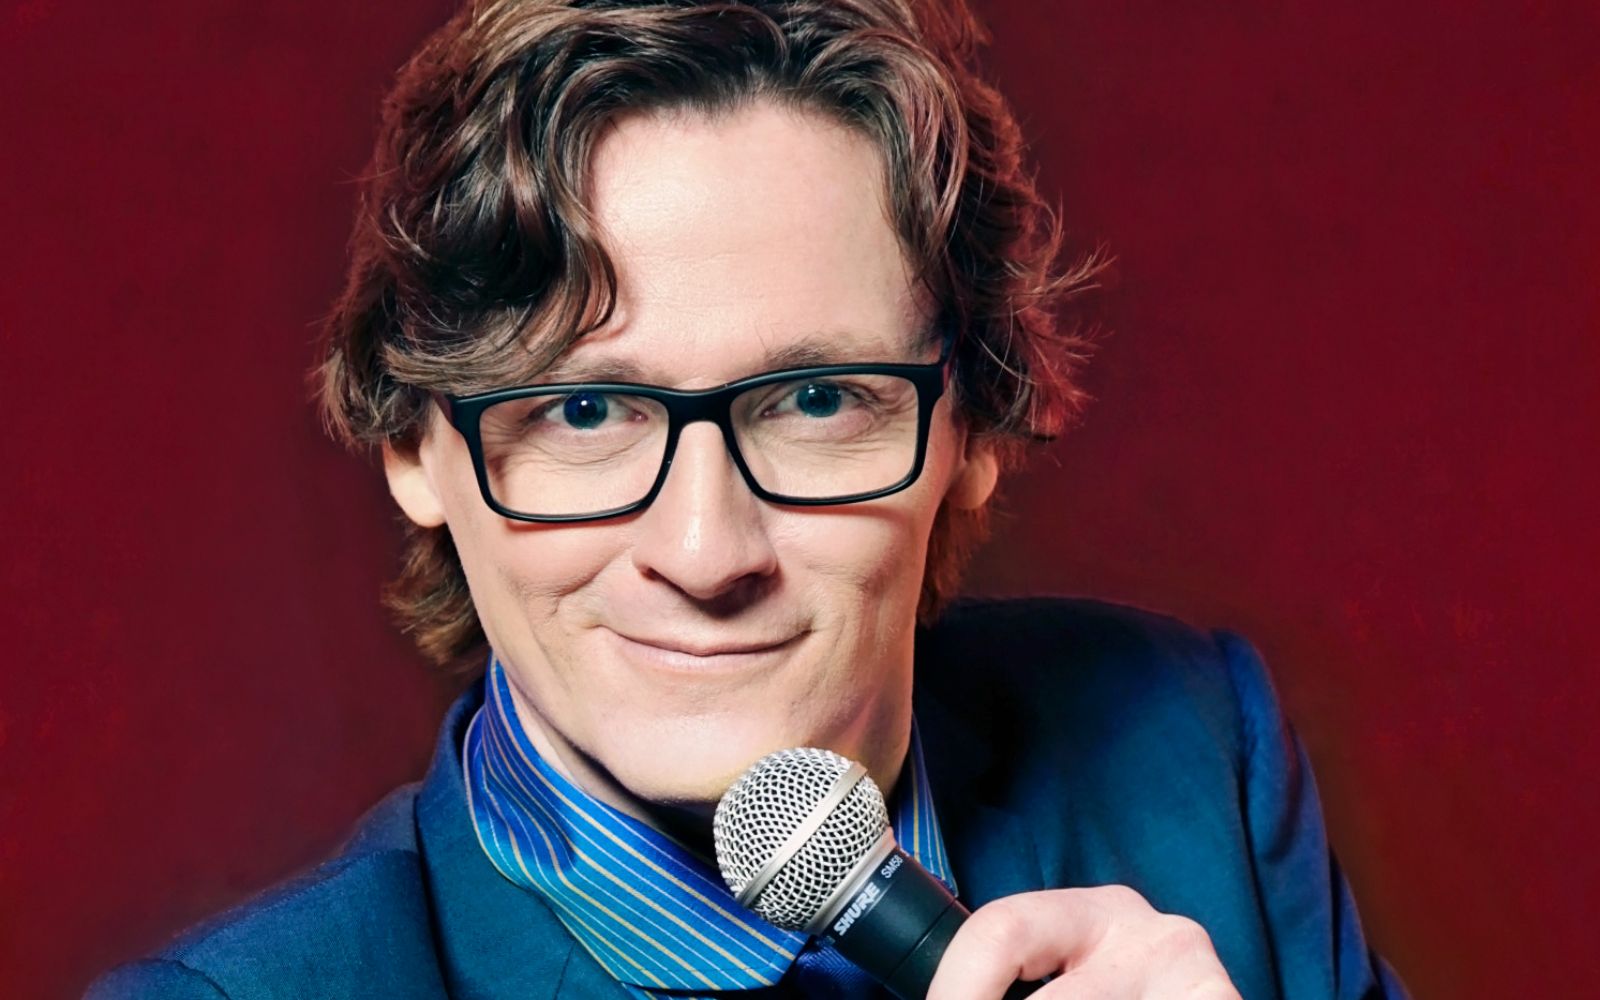 Ed Byrne triumphantly makes light of darkness at Comedy Festival [Video]